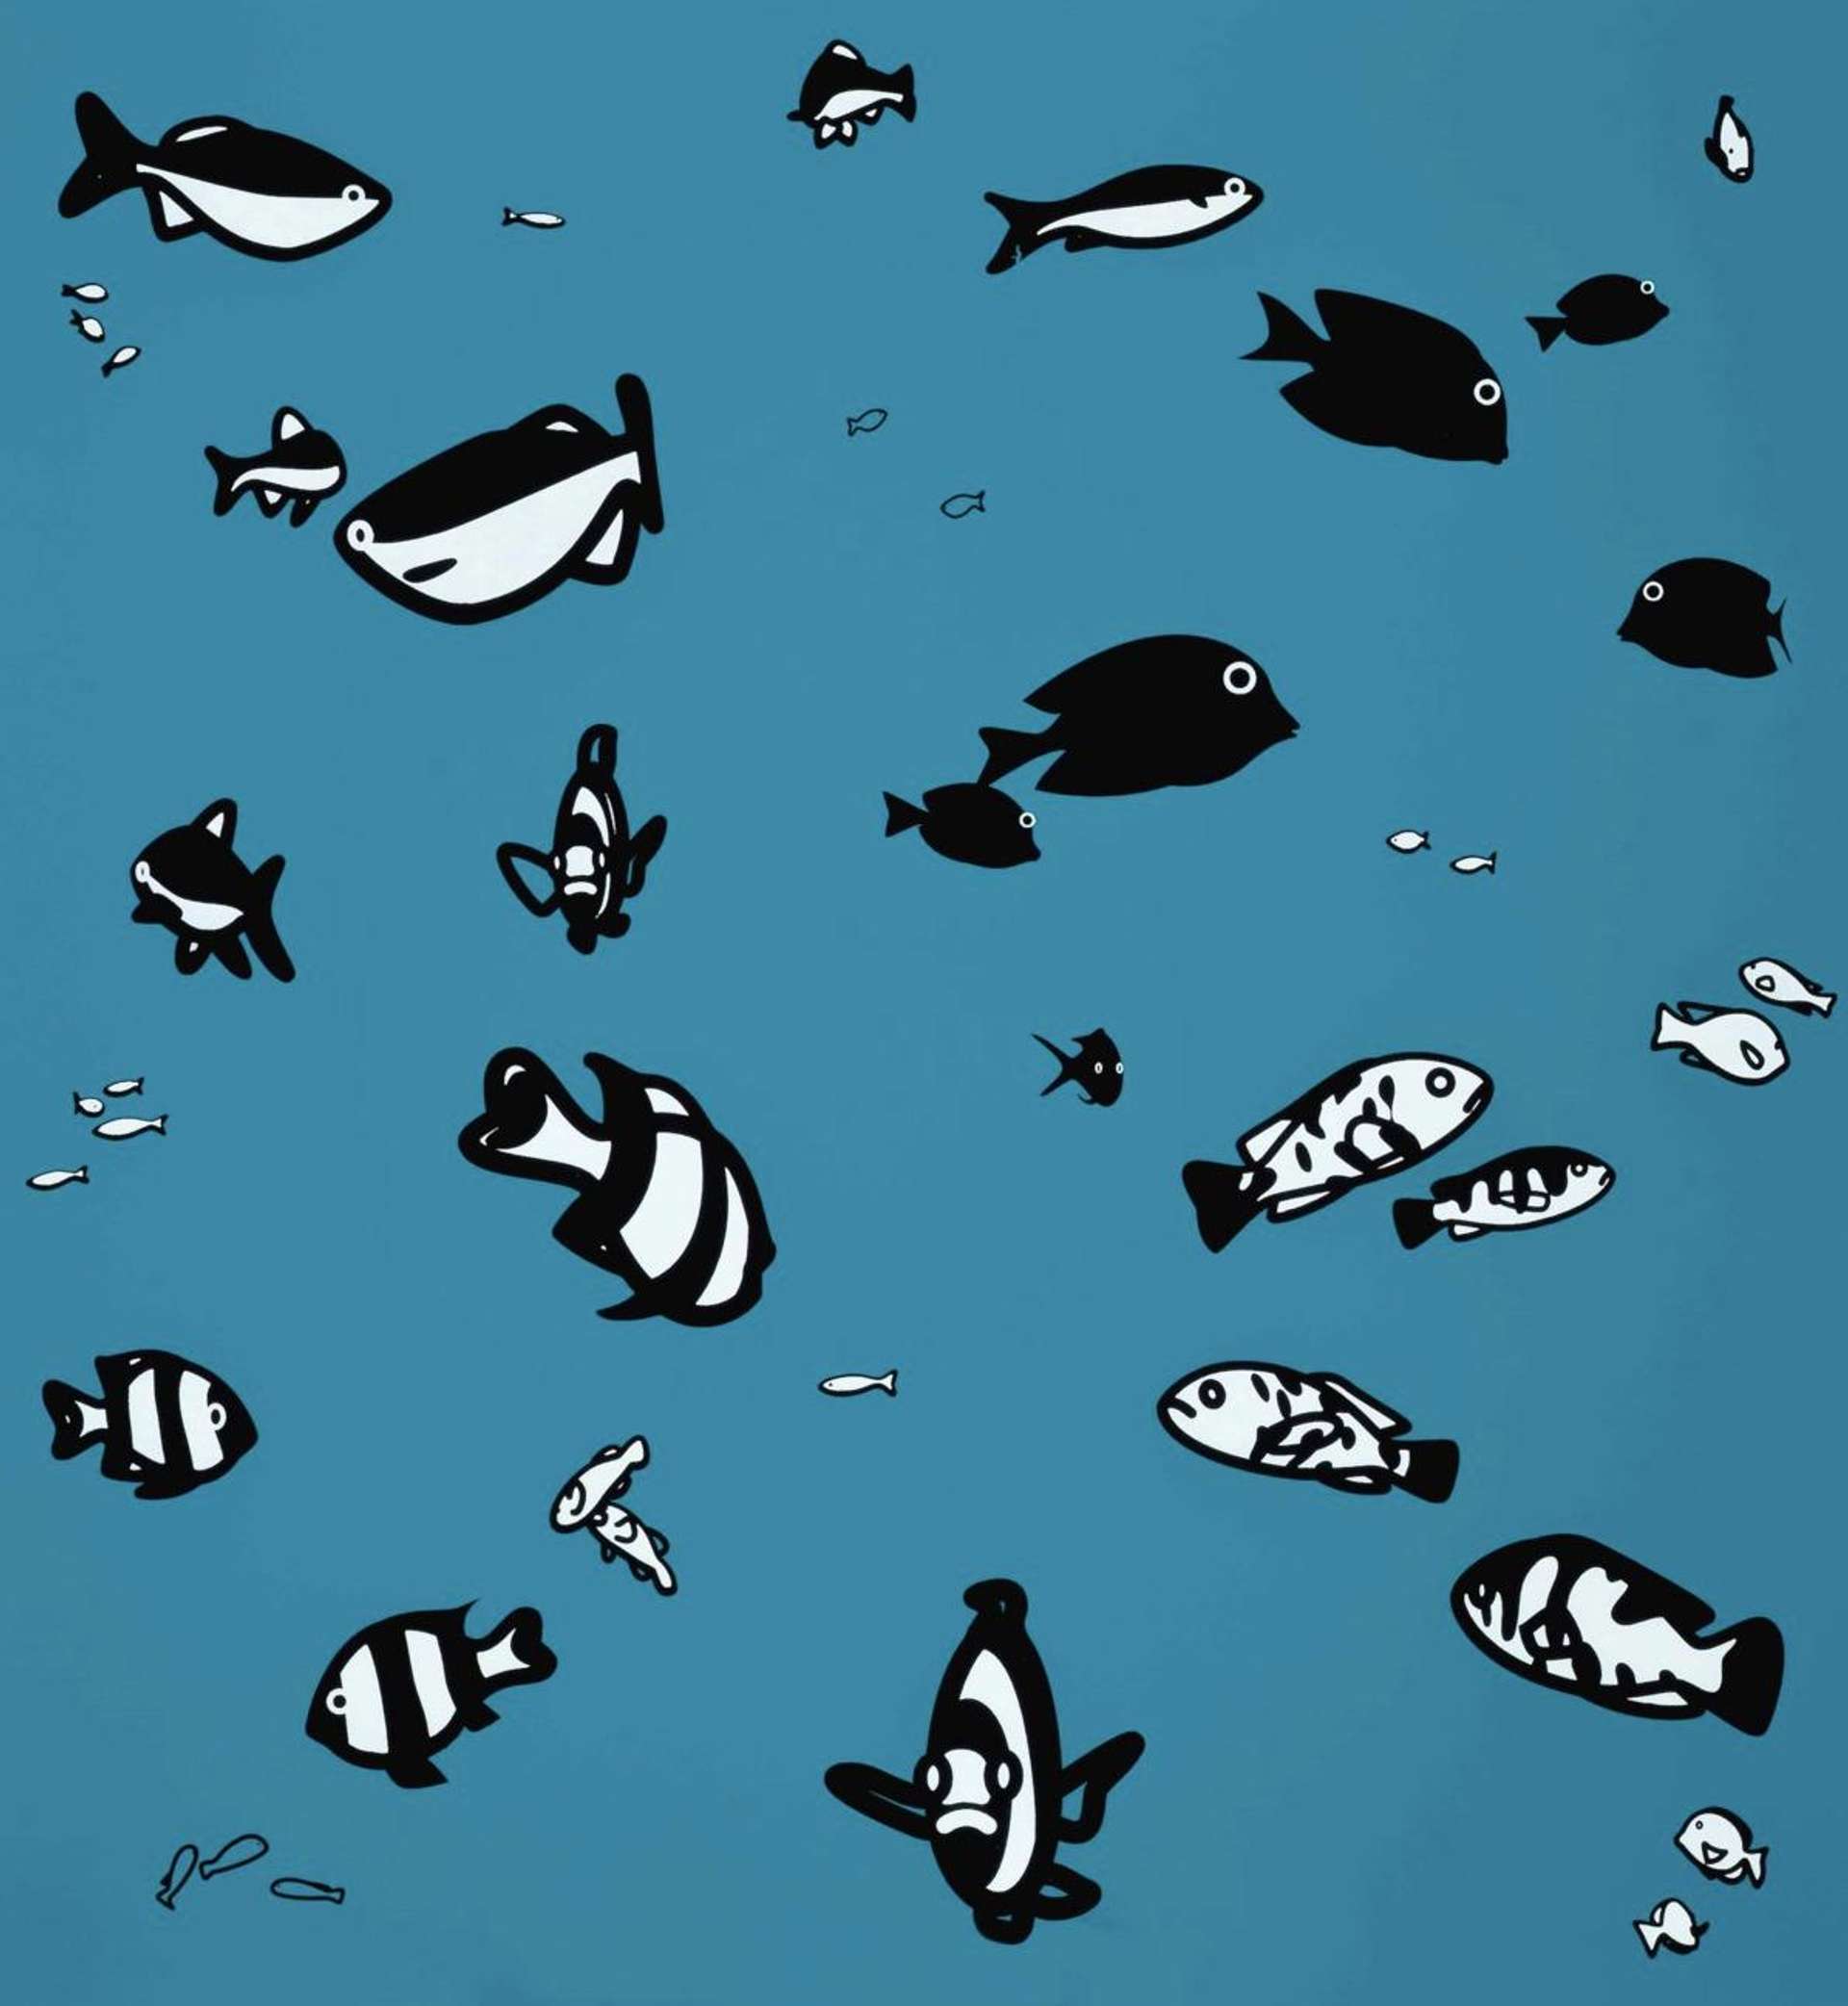 Small black and white fish painted on a sky blue background.